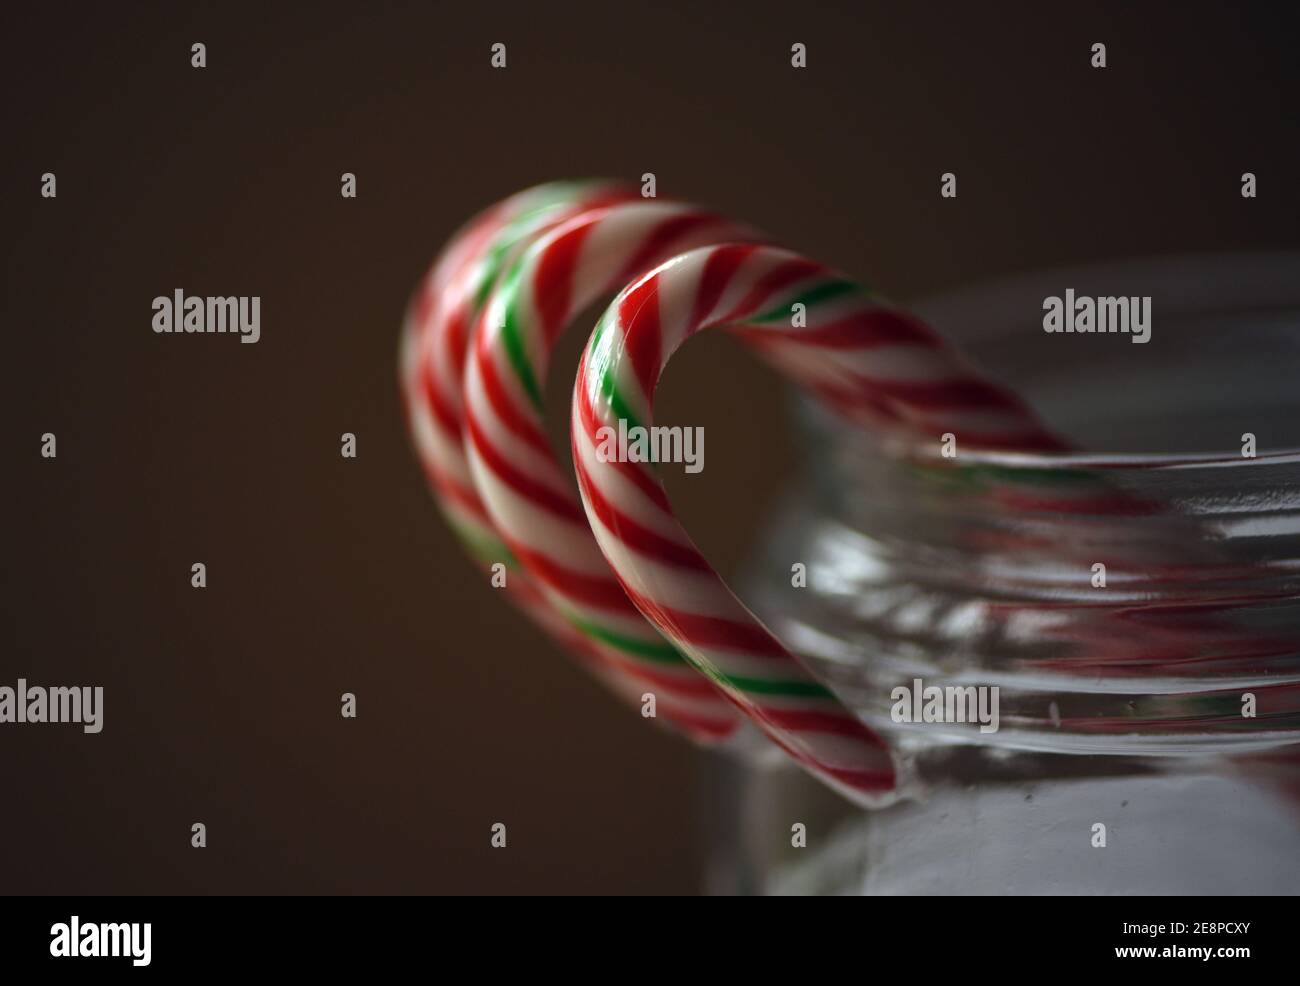 Christmas sweets, plastic wrapped candy canes in a clear glass jar Stock Photo